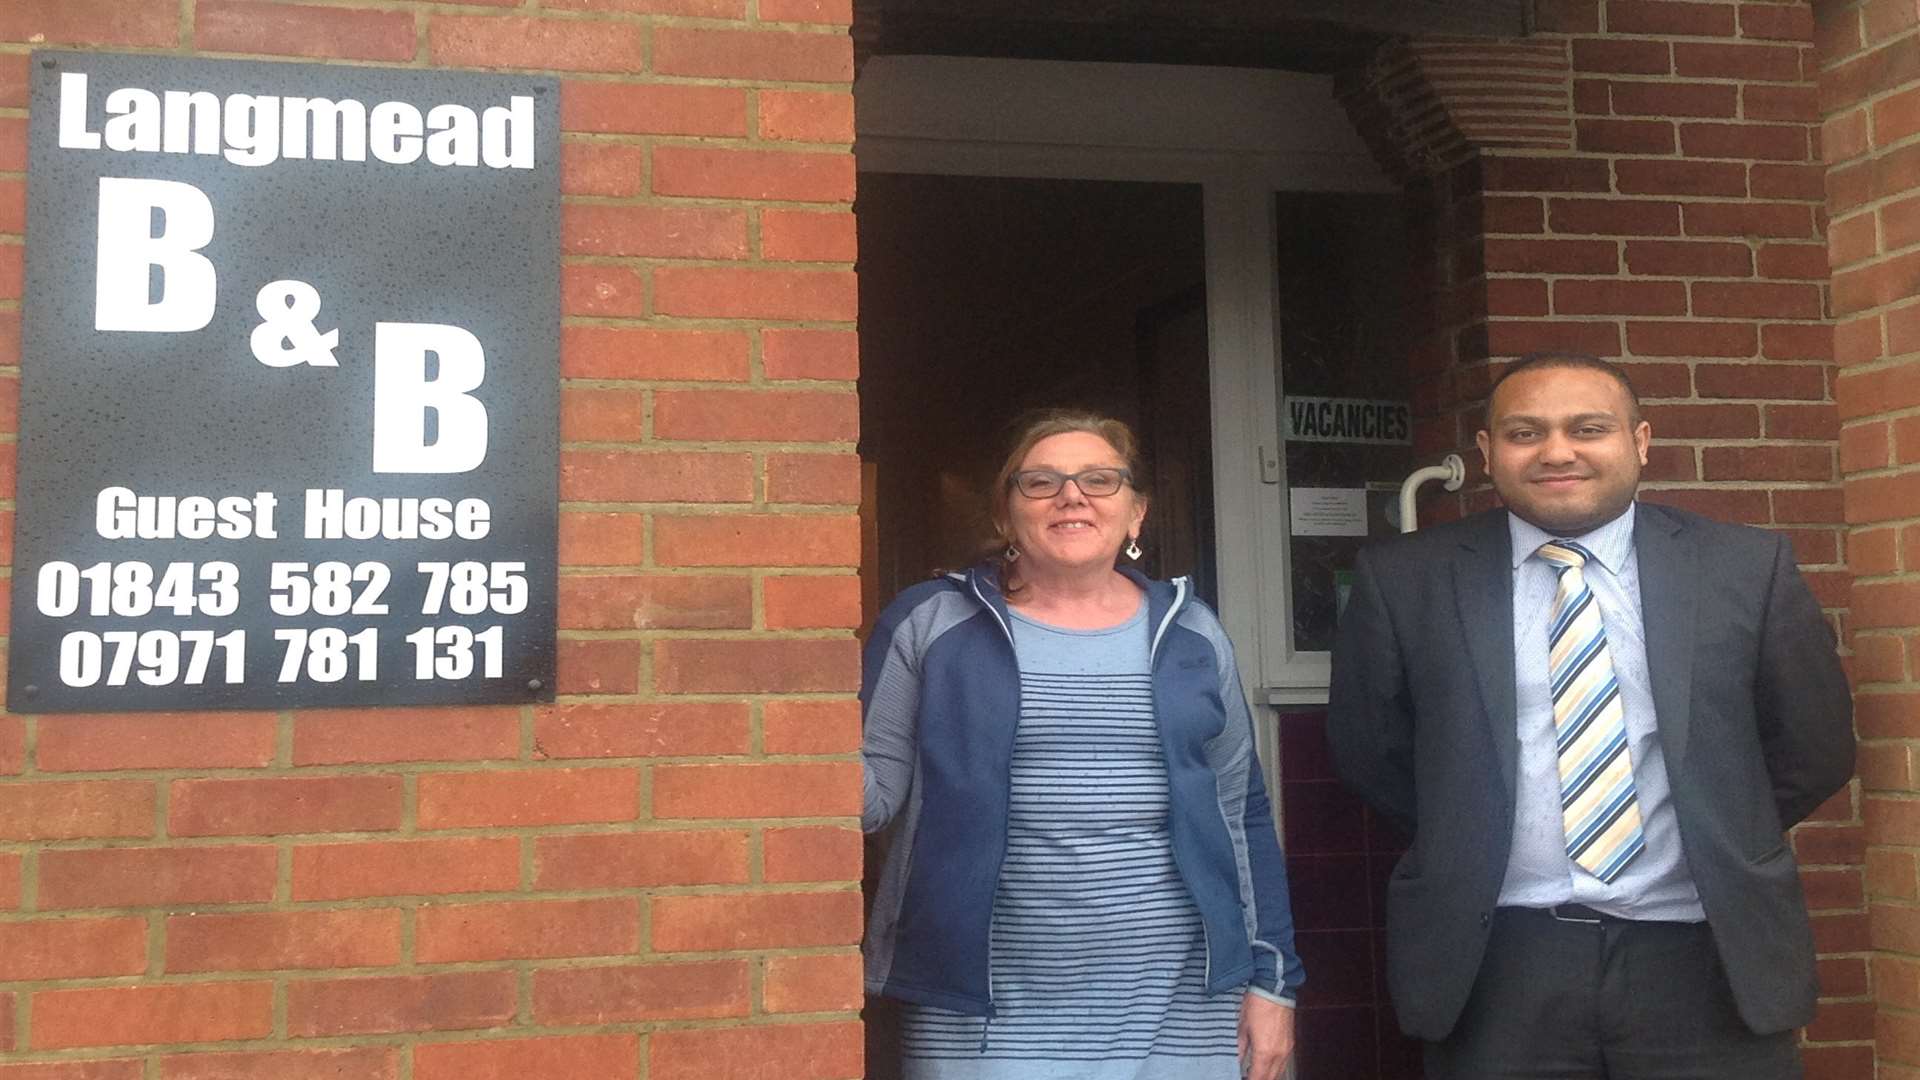 Denise Hill outside Langmead Guest House in Ramsgate, which she bought with a loan agreed with NatWest relationship manager Ahmed Khan